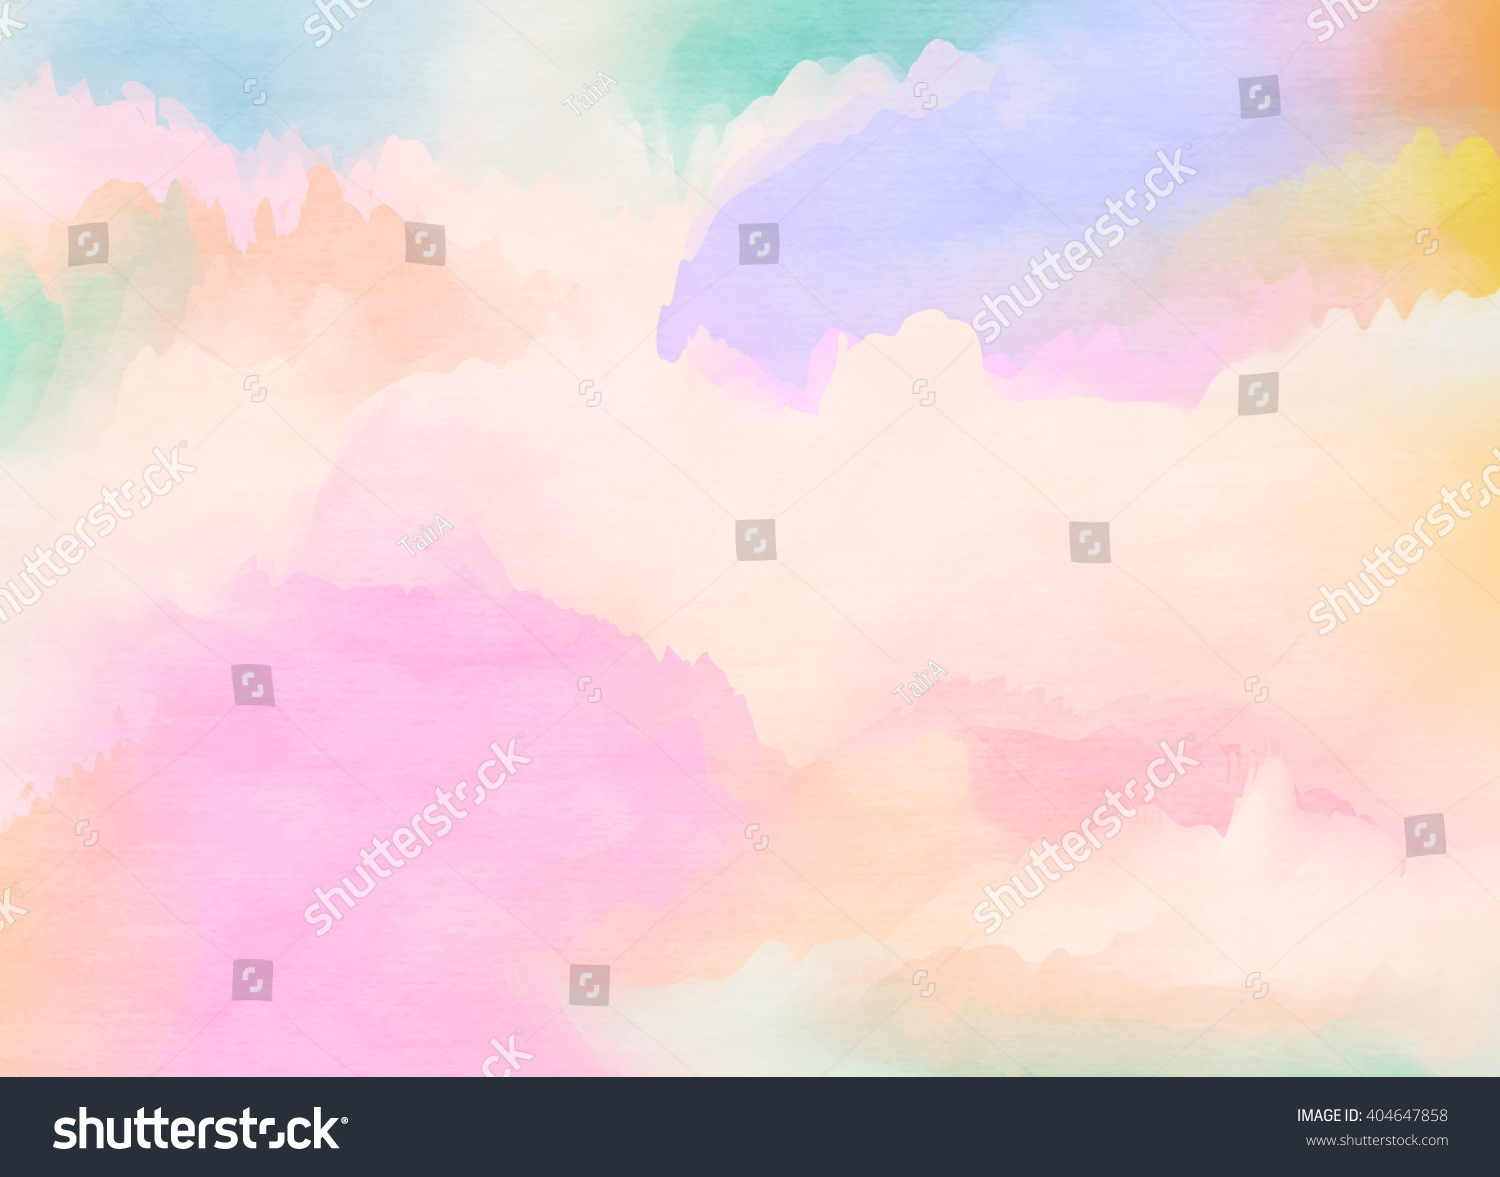 Abstract Watercolor Background Digital Art Painting Stock Illustration ...